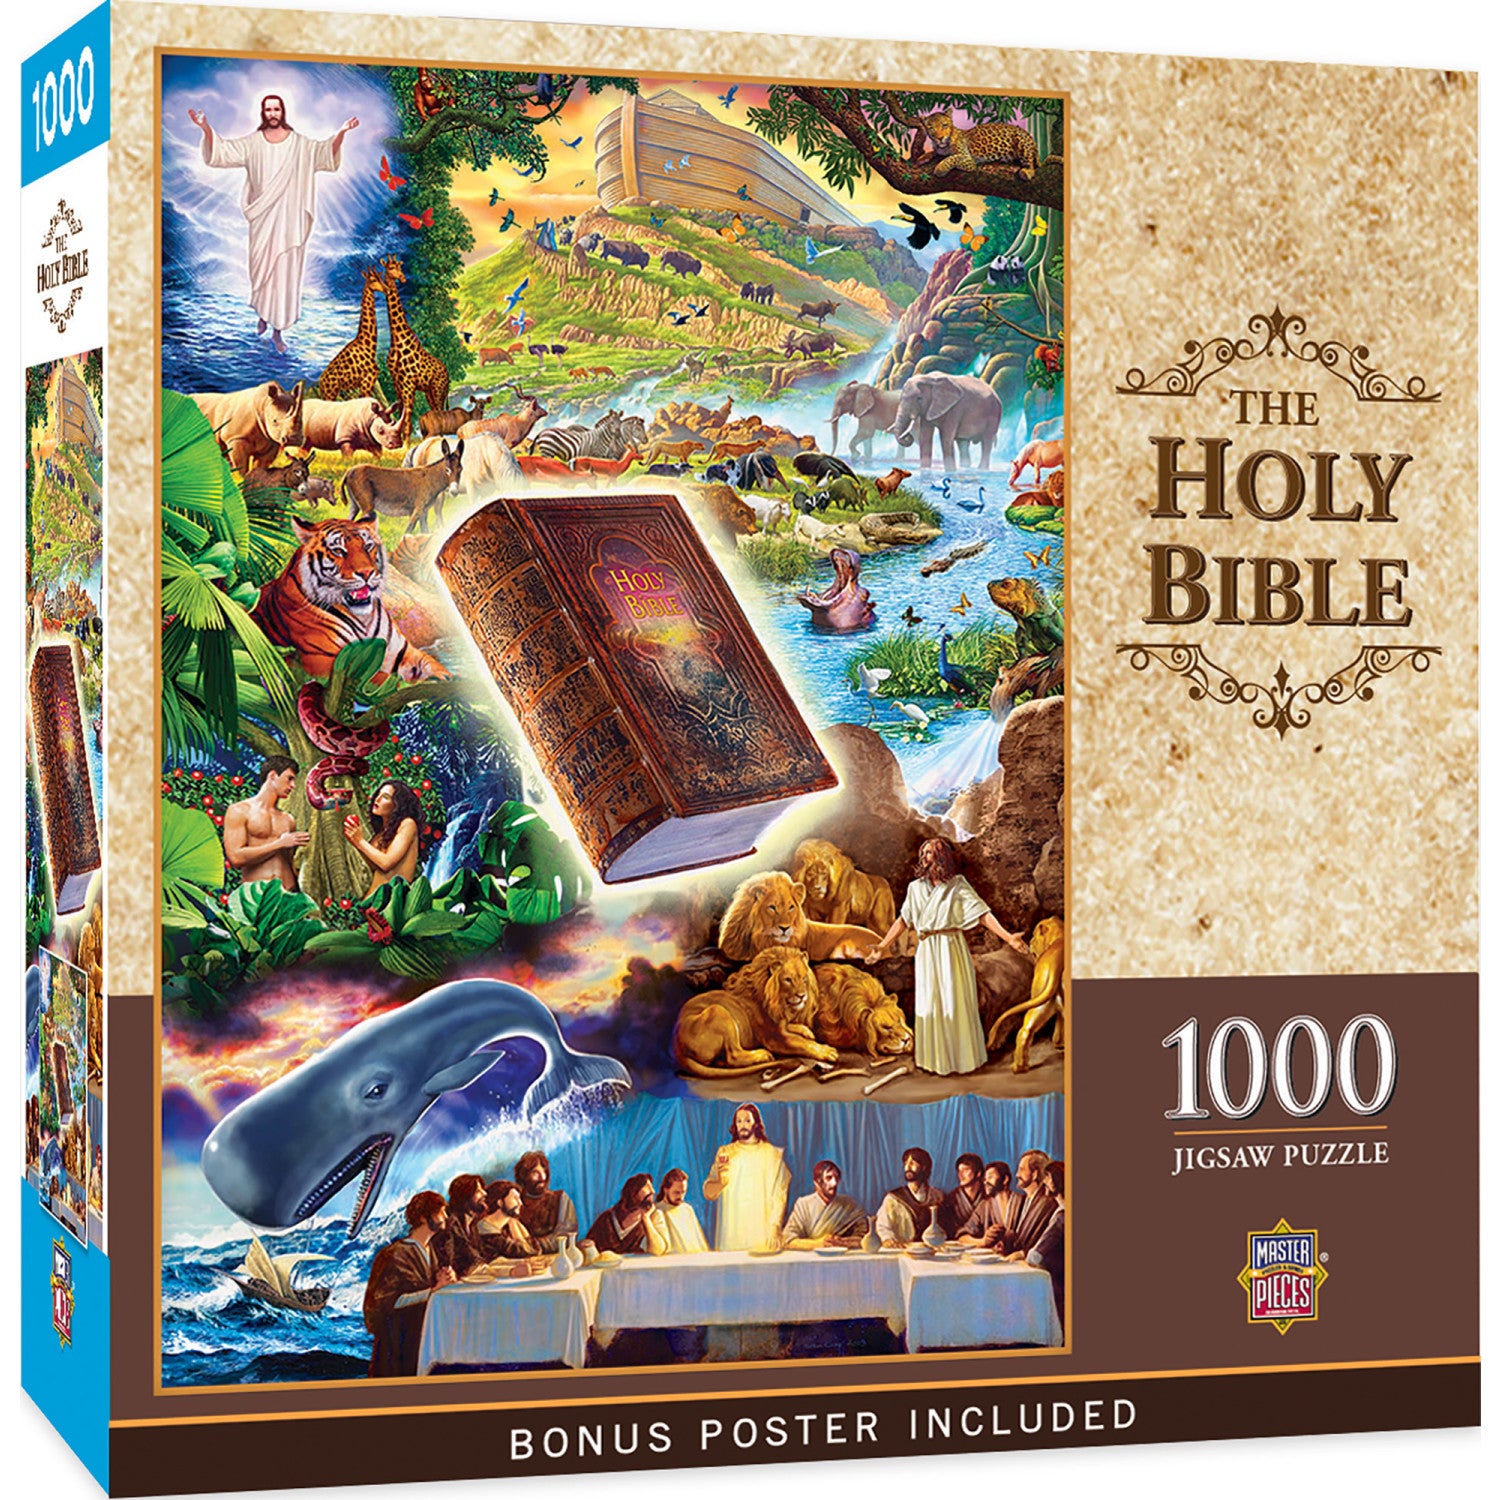 Cra-Z-Art - RoseArt - Inspirations - Last Supper - 1000 pice jigsaw puzzle